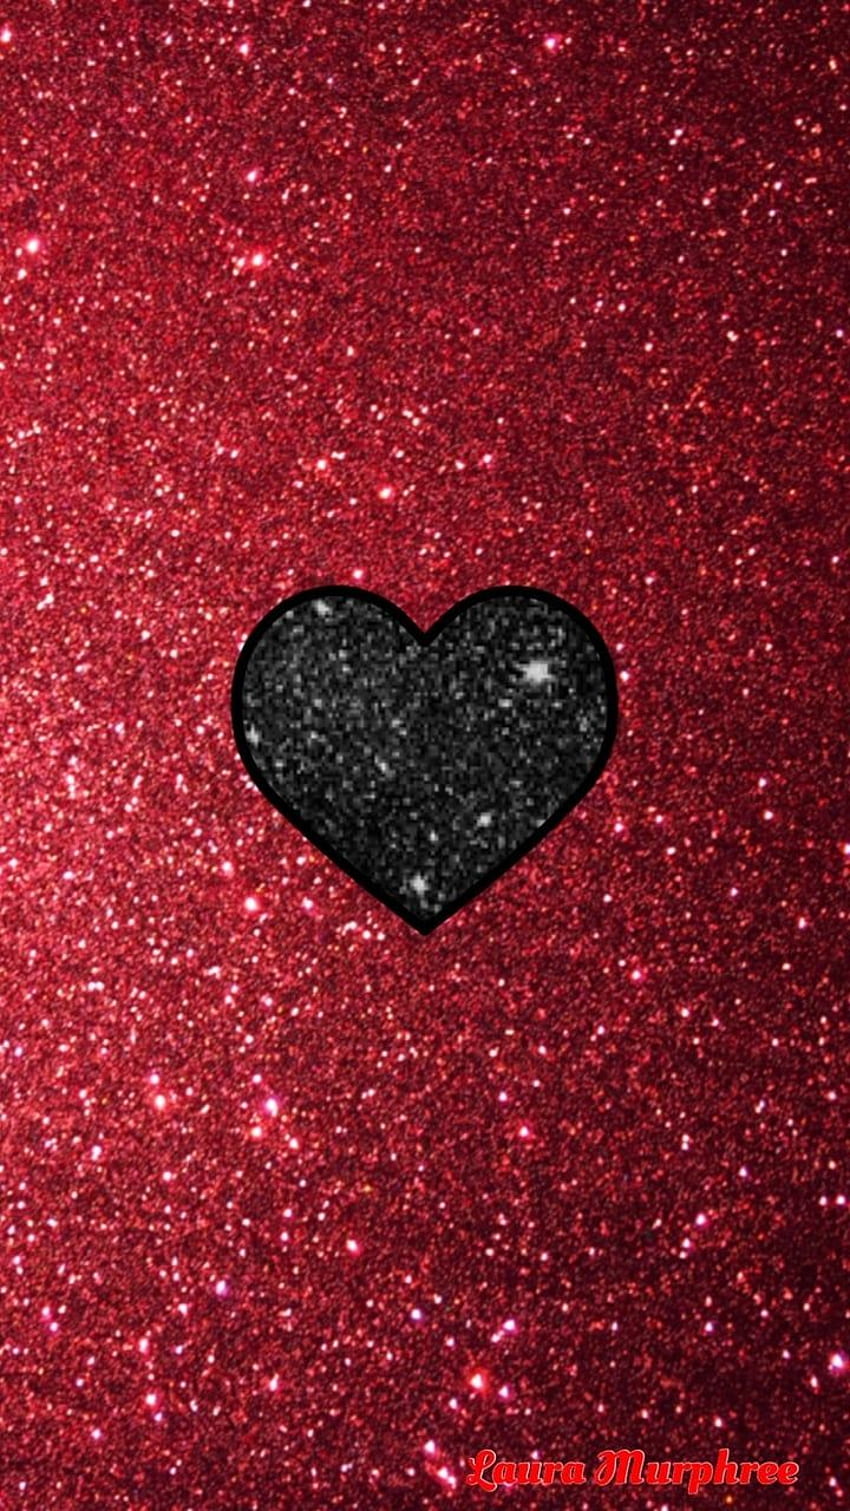 Glitter Textured Red and Black Shaded Background Wallpaper Stock Image   Image of detail colorful 149883195